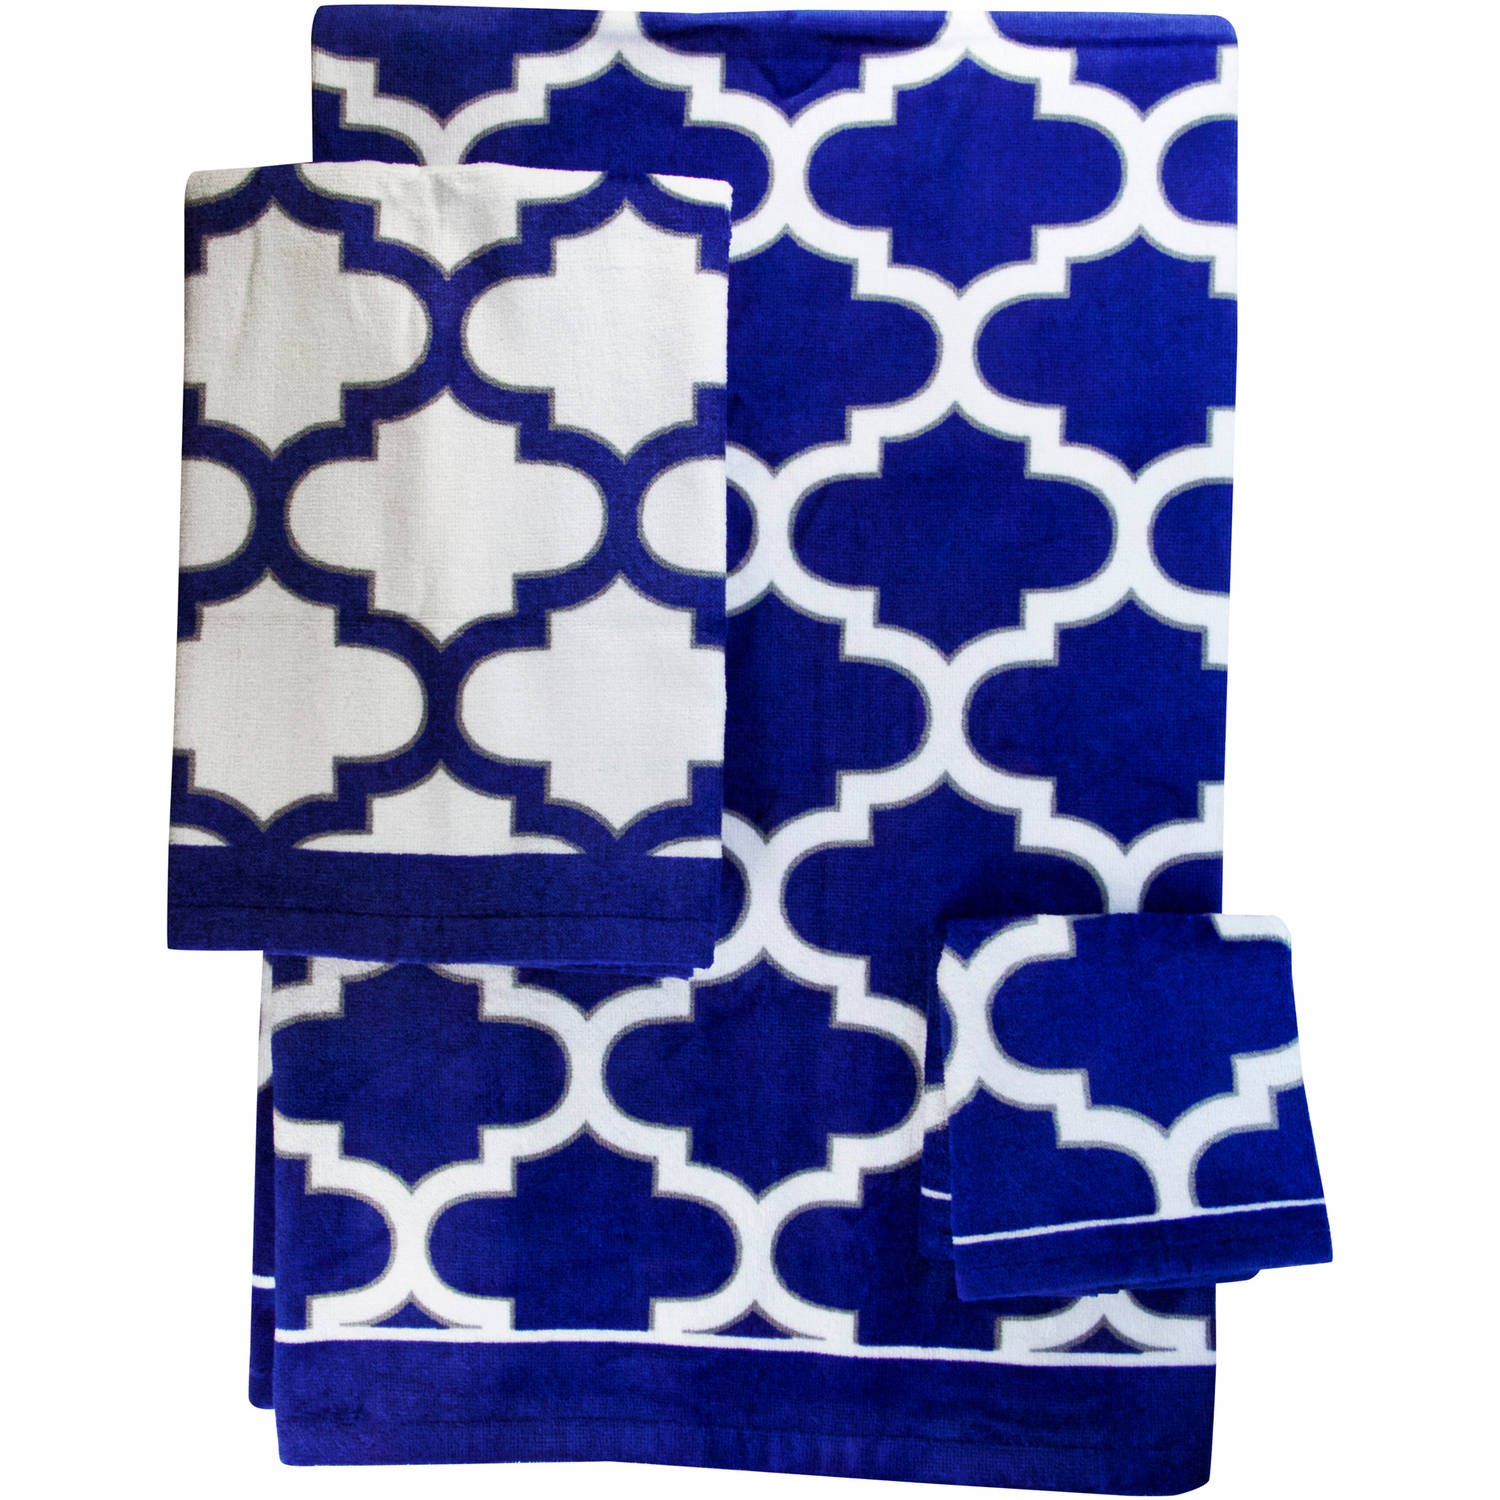 Mainstays Fretwork Navy & White Towel, 1 Each - image 1 of 2